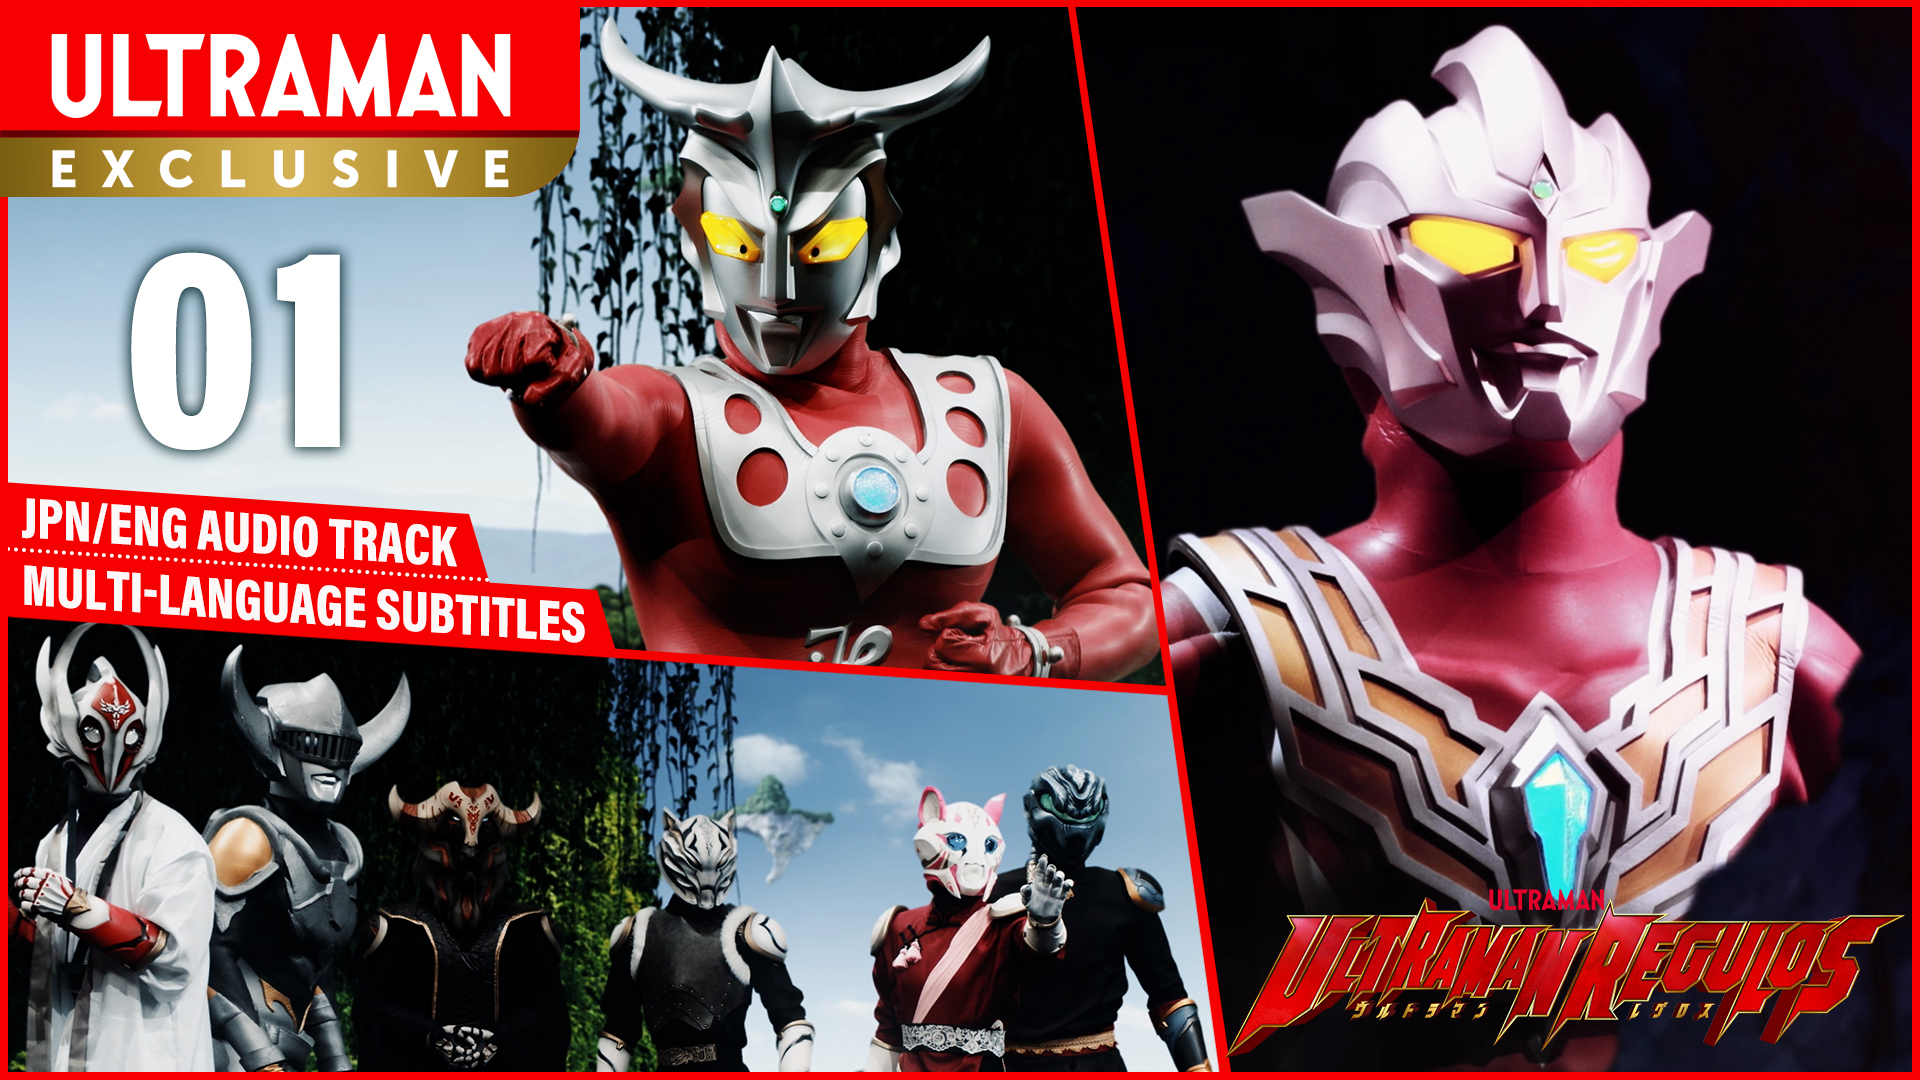 Ultraman Regulos Episode 1 Available on Ultraman OFFICIAL YouT...